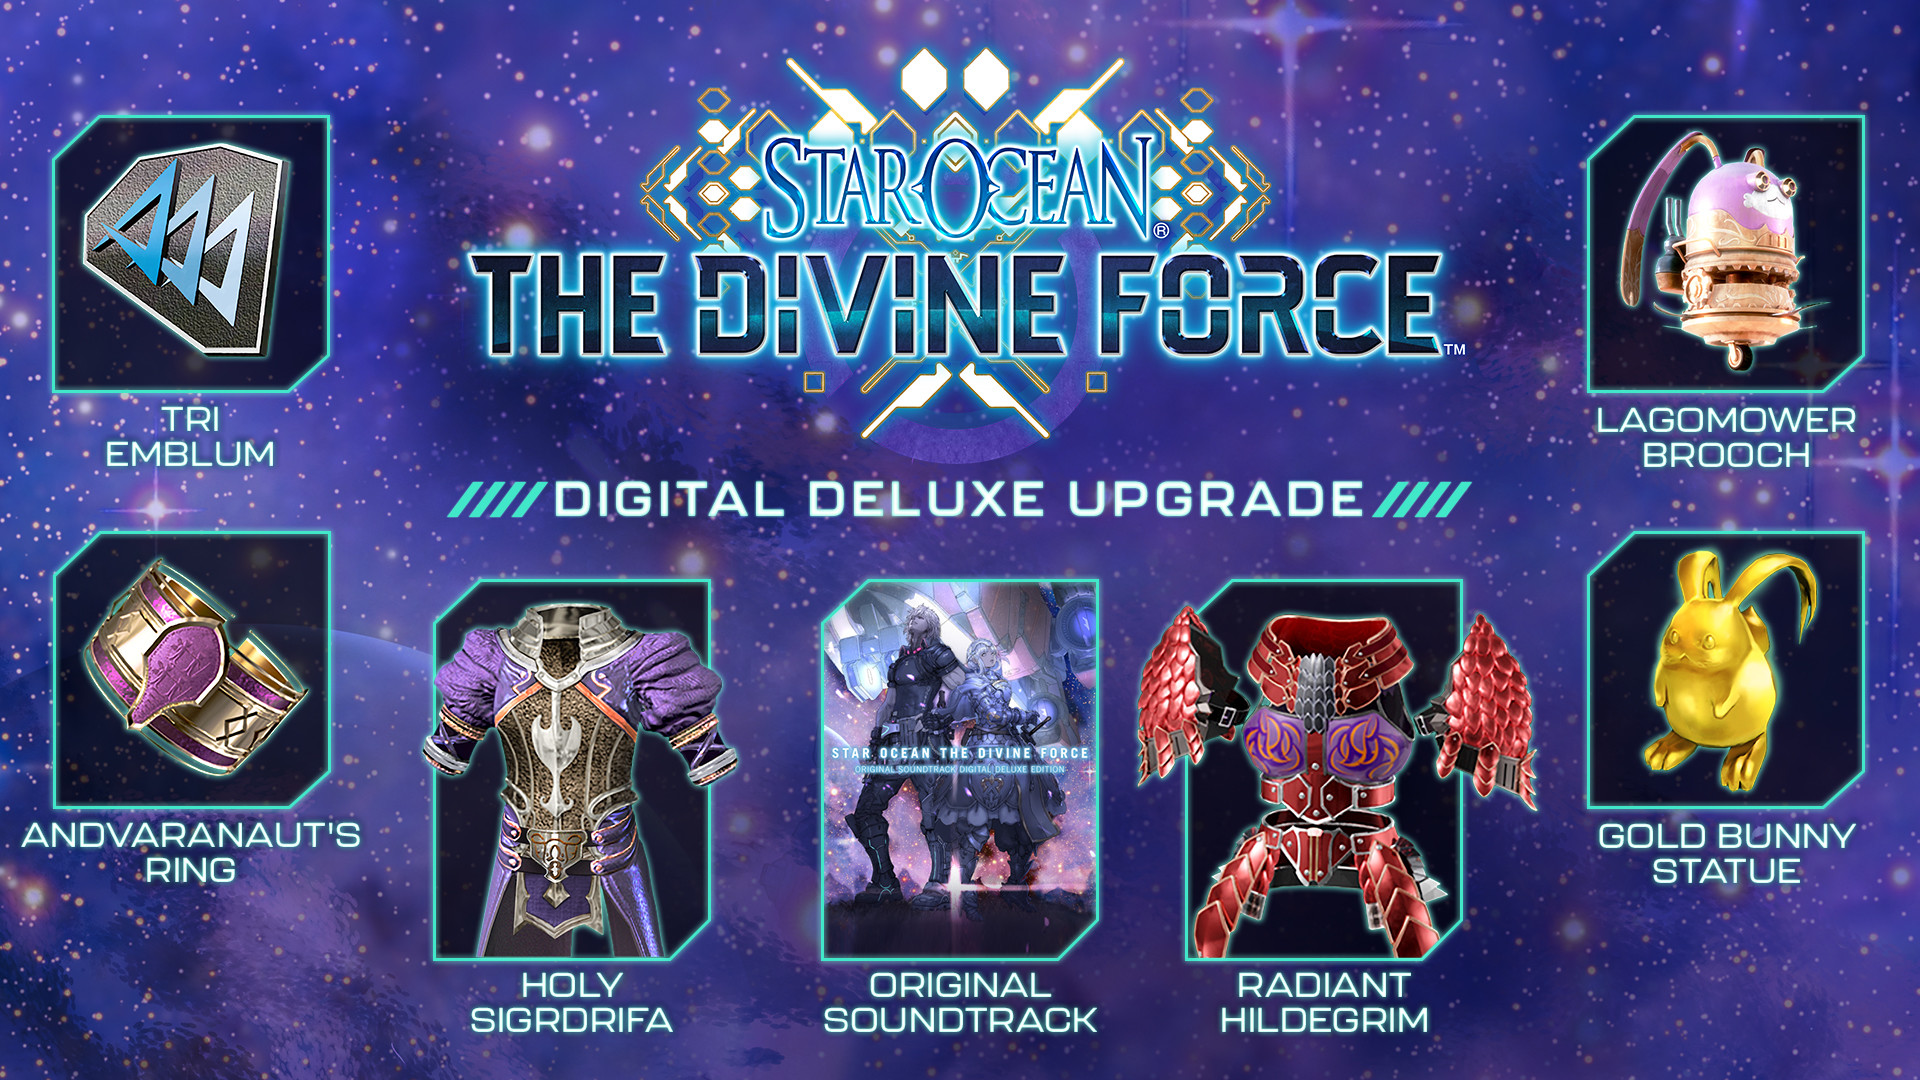 STAR OCEAN THE DIVINE FORCE DIGITAL DELUXE UPGRADE on Steam